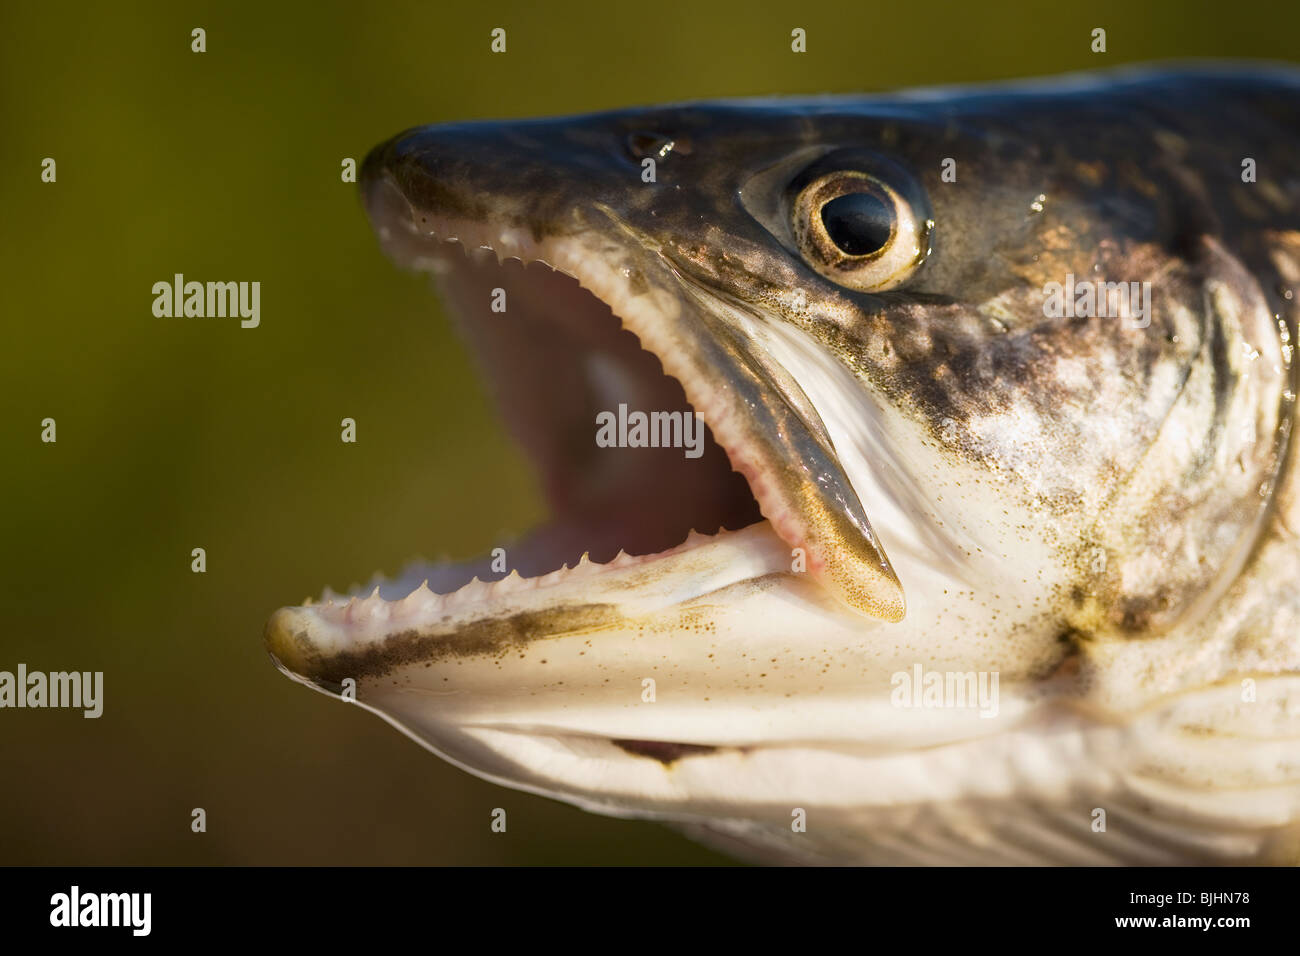 Lake trout with mouth open Stock Photo